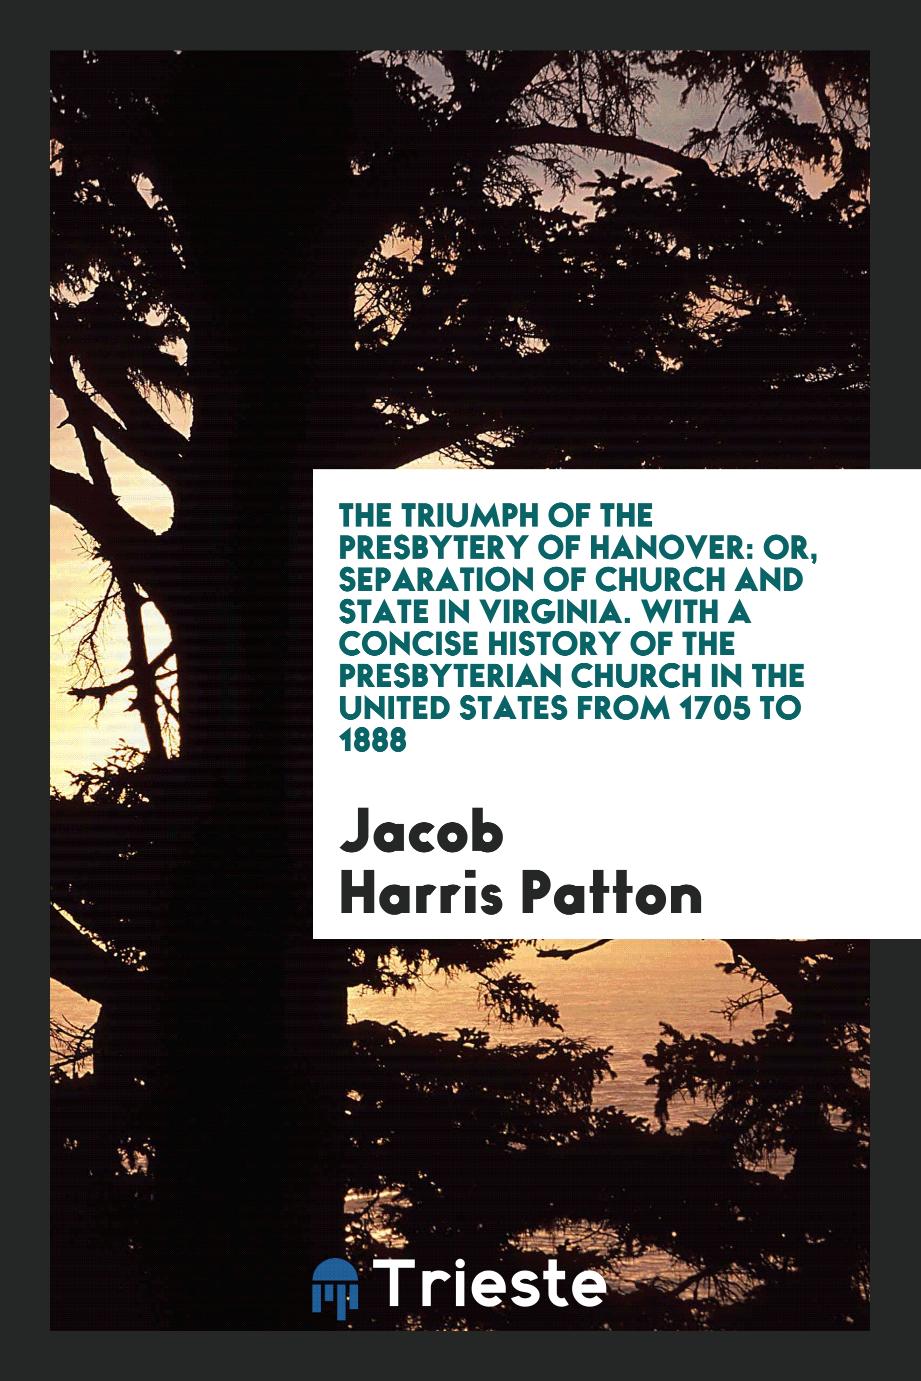 The Triumph of the Presbytery of Hanover: Or, Separation of Church and State in Virginia. With a Concise History of the Presbyterian Church in the United States from 1705 to 1888